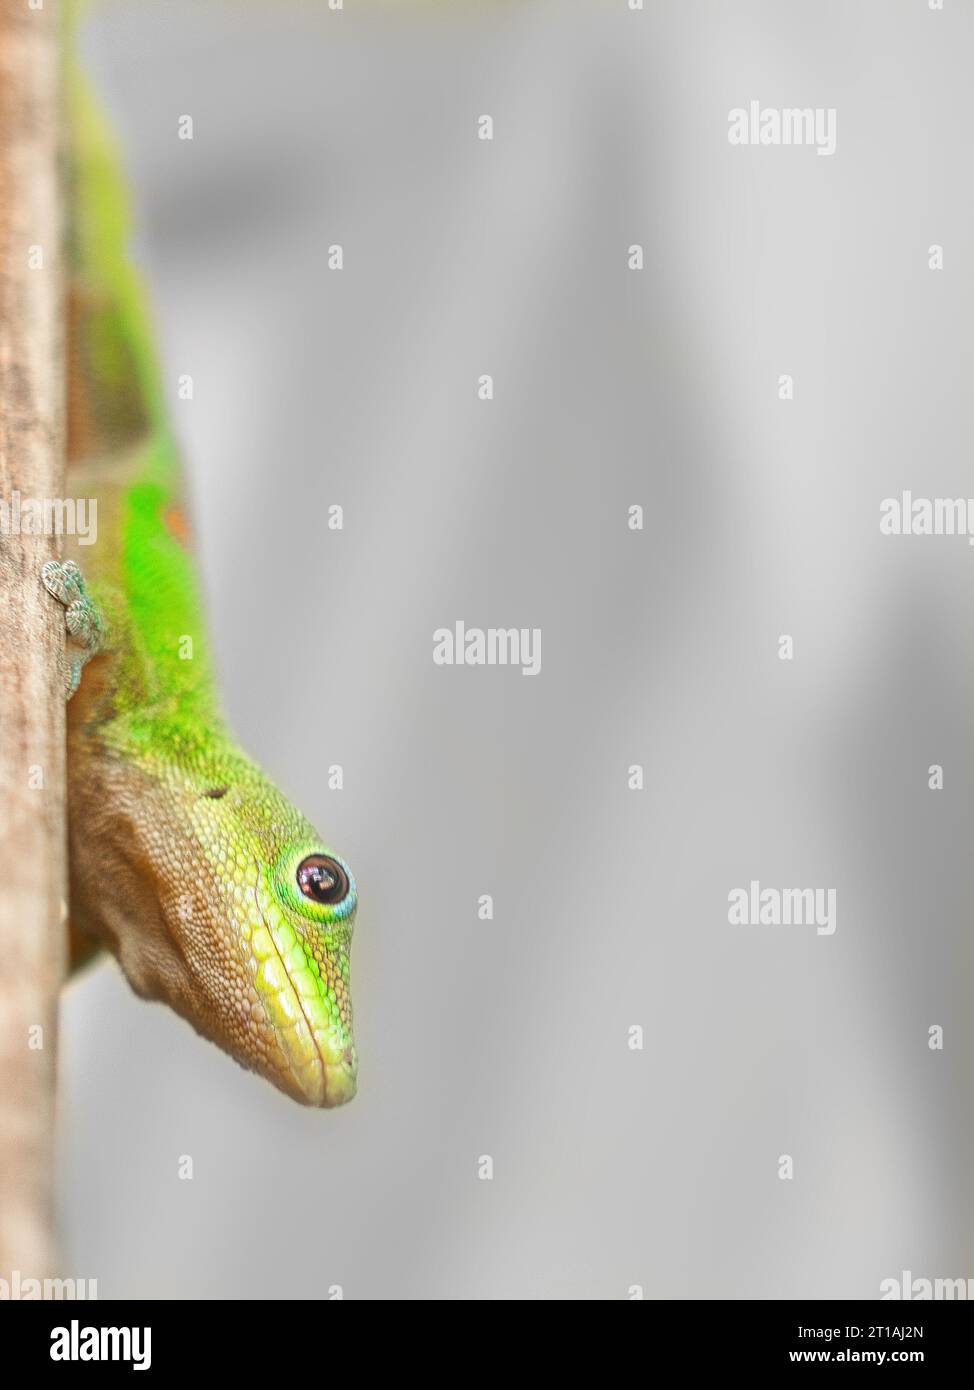 Gold dust day gecko, small green lizard, on a door frame in Hawaii, looking curious and happy. Stock Photo